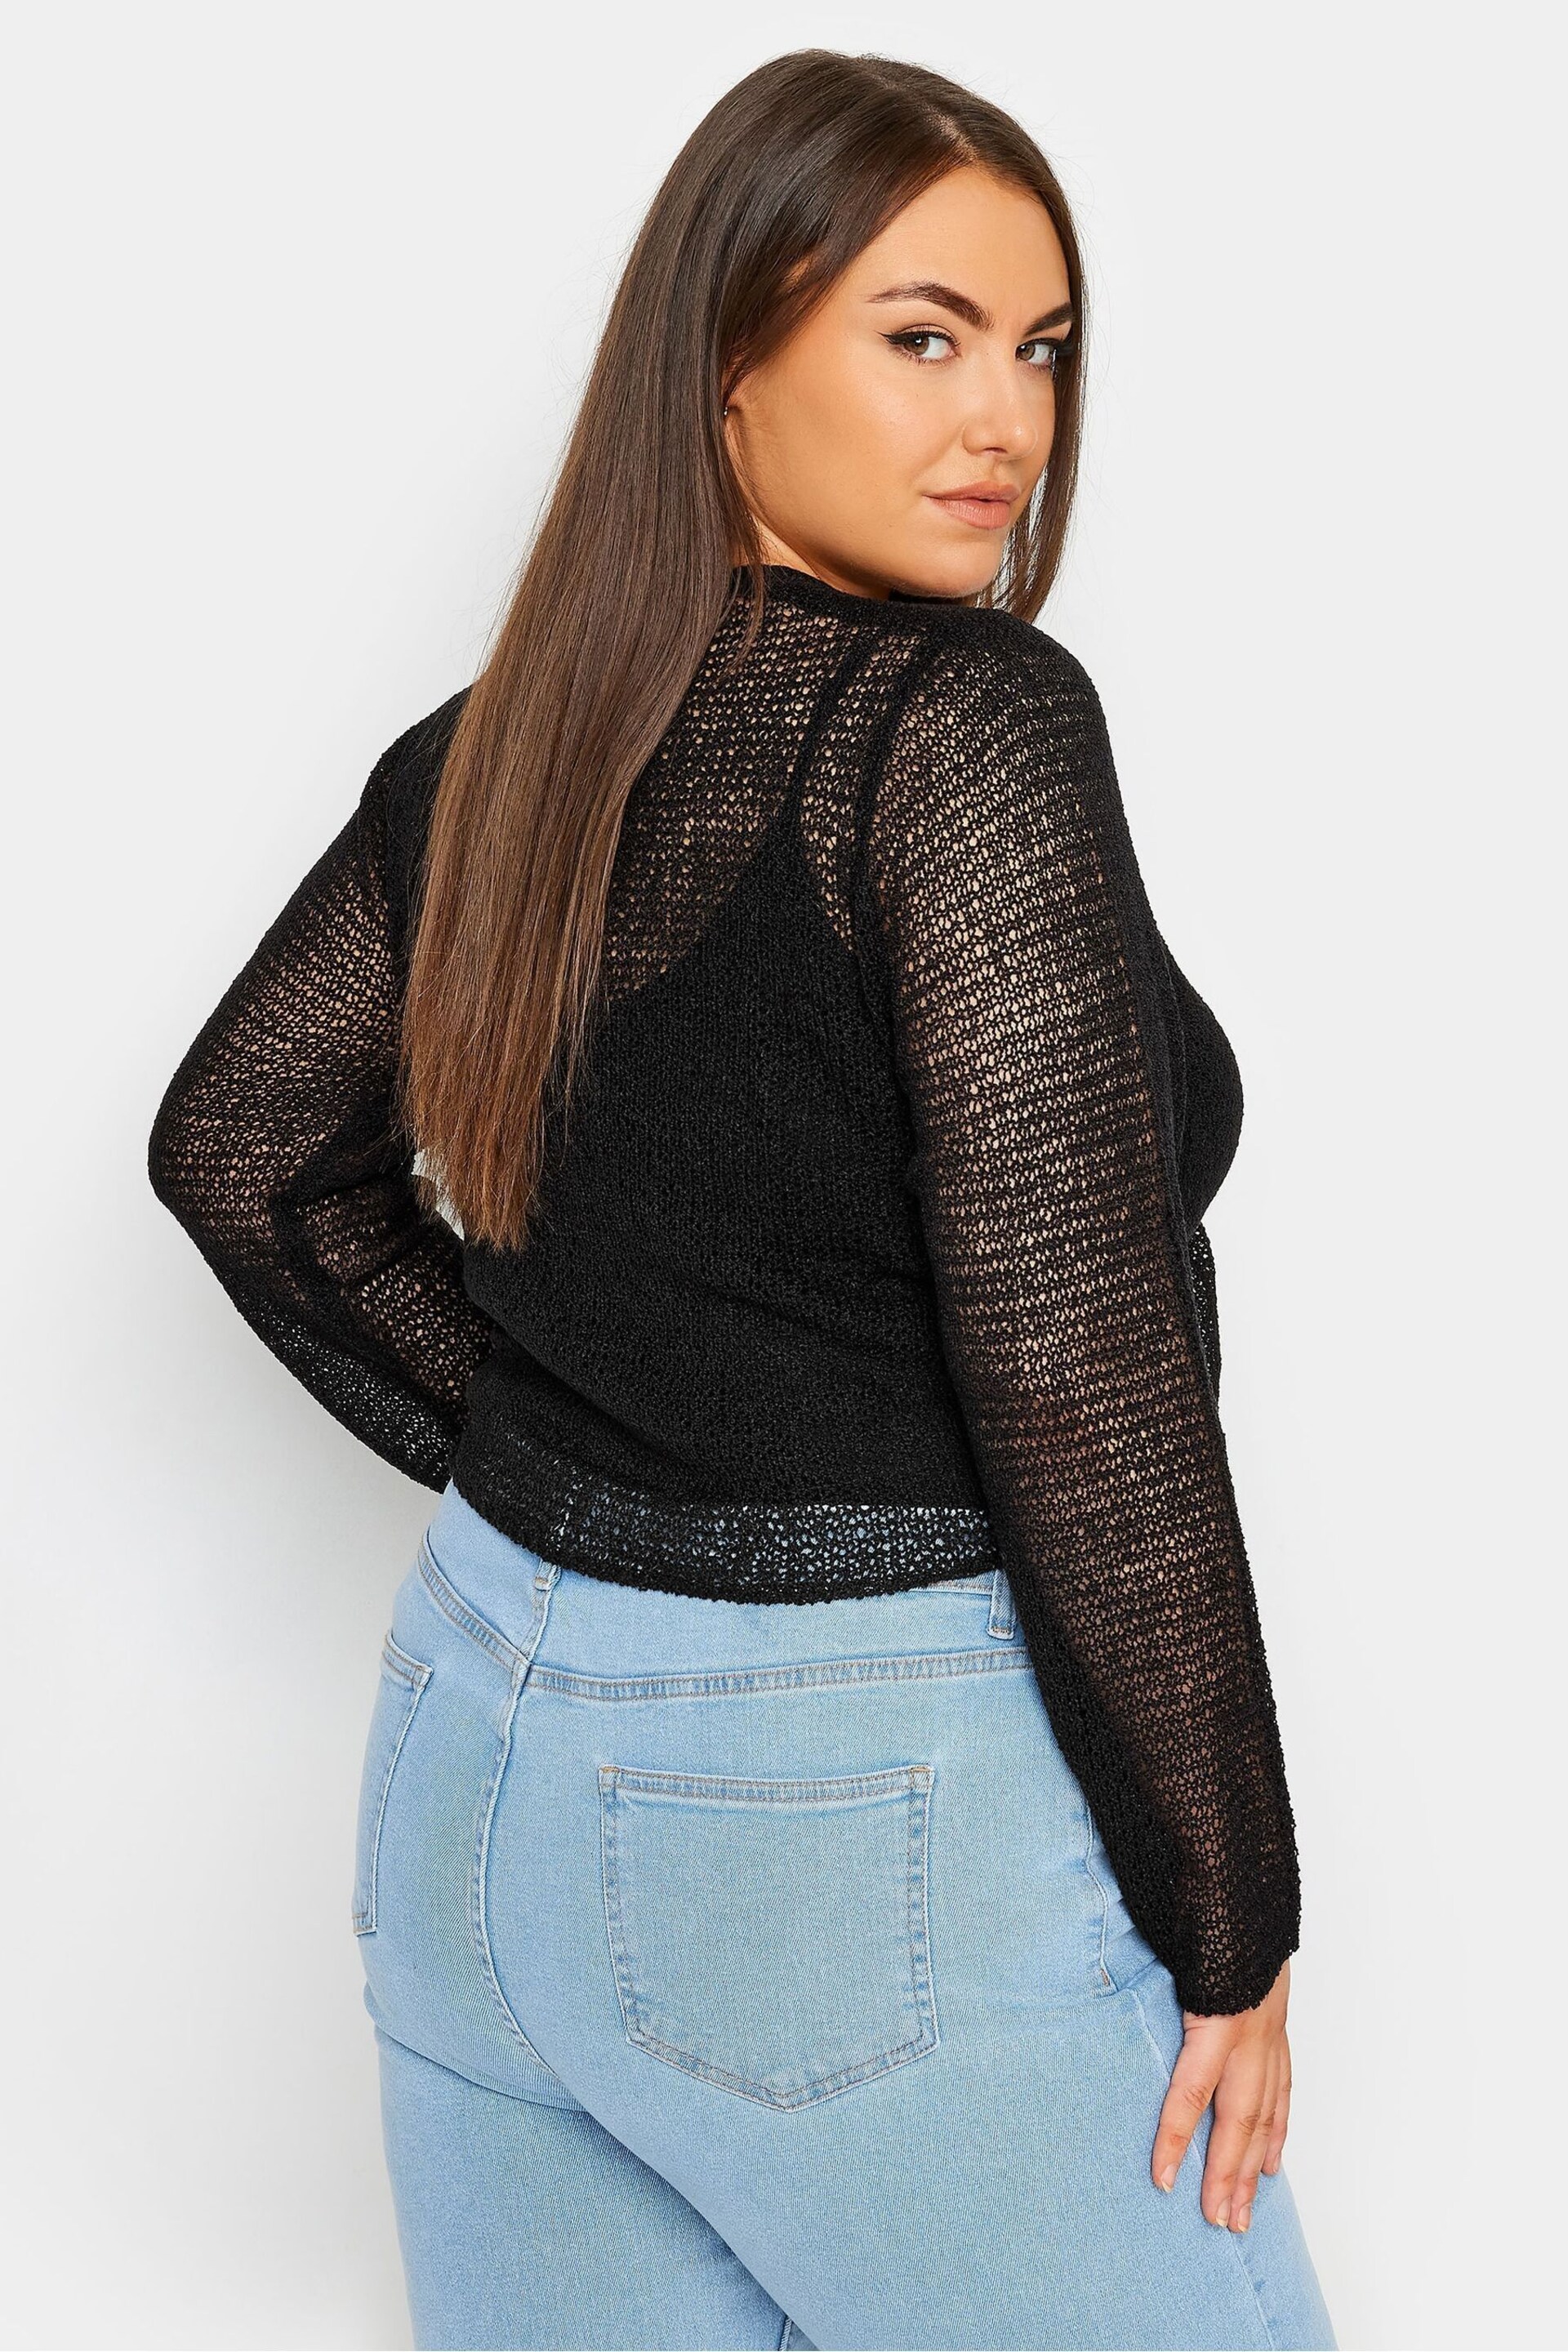 Yours Curve Black Crochet Tie Front Cardigan - Image 3 of 5